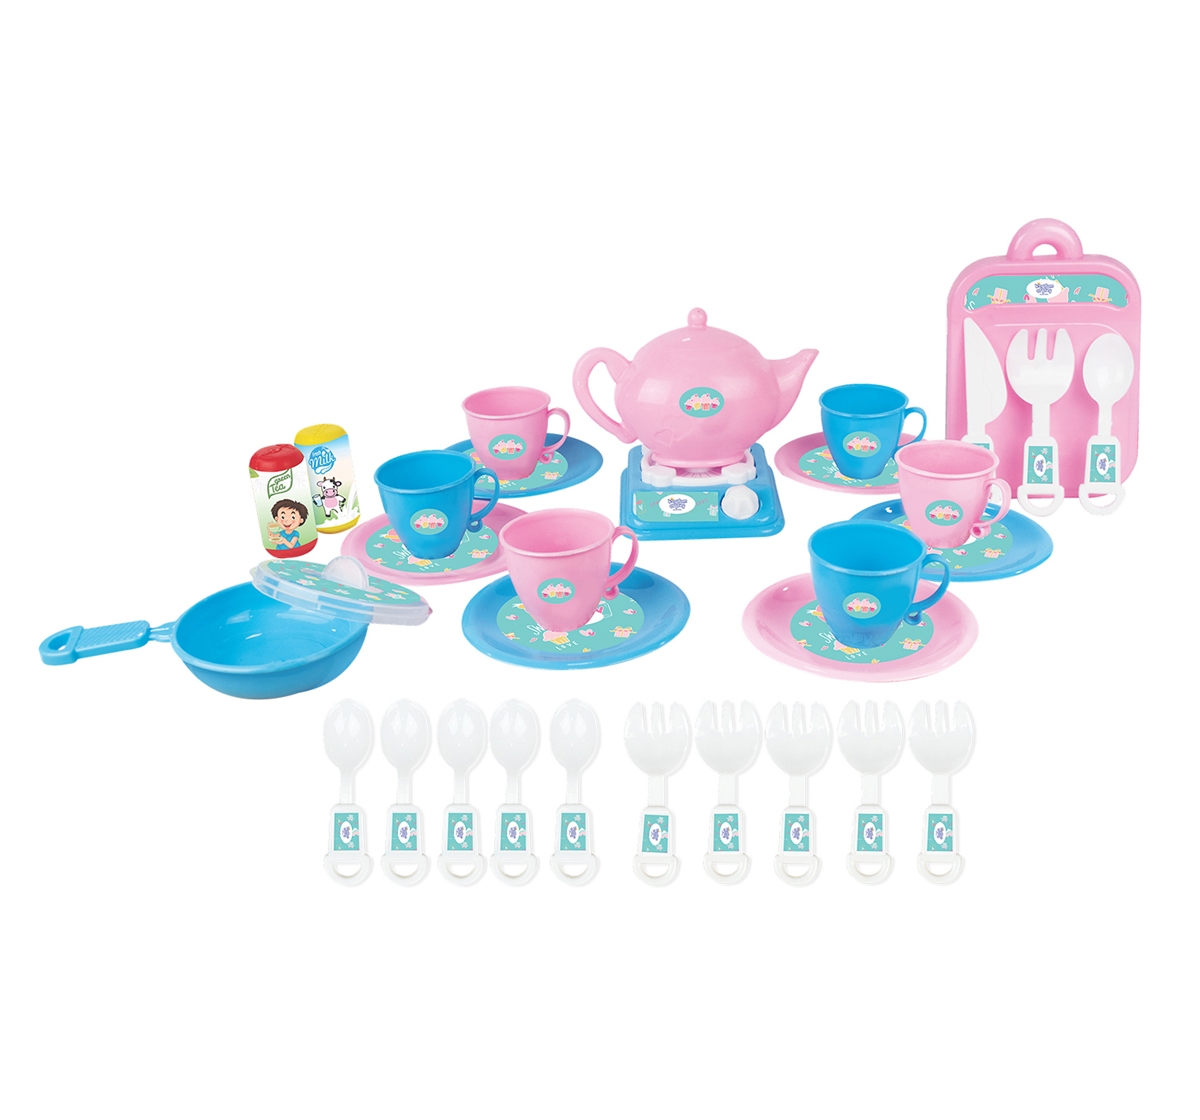 Kingdom Of Play | Kingdom Of Play Tea Party role play kitchen set for kids Multicolor 24M+